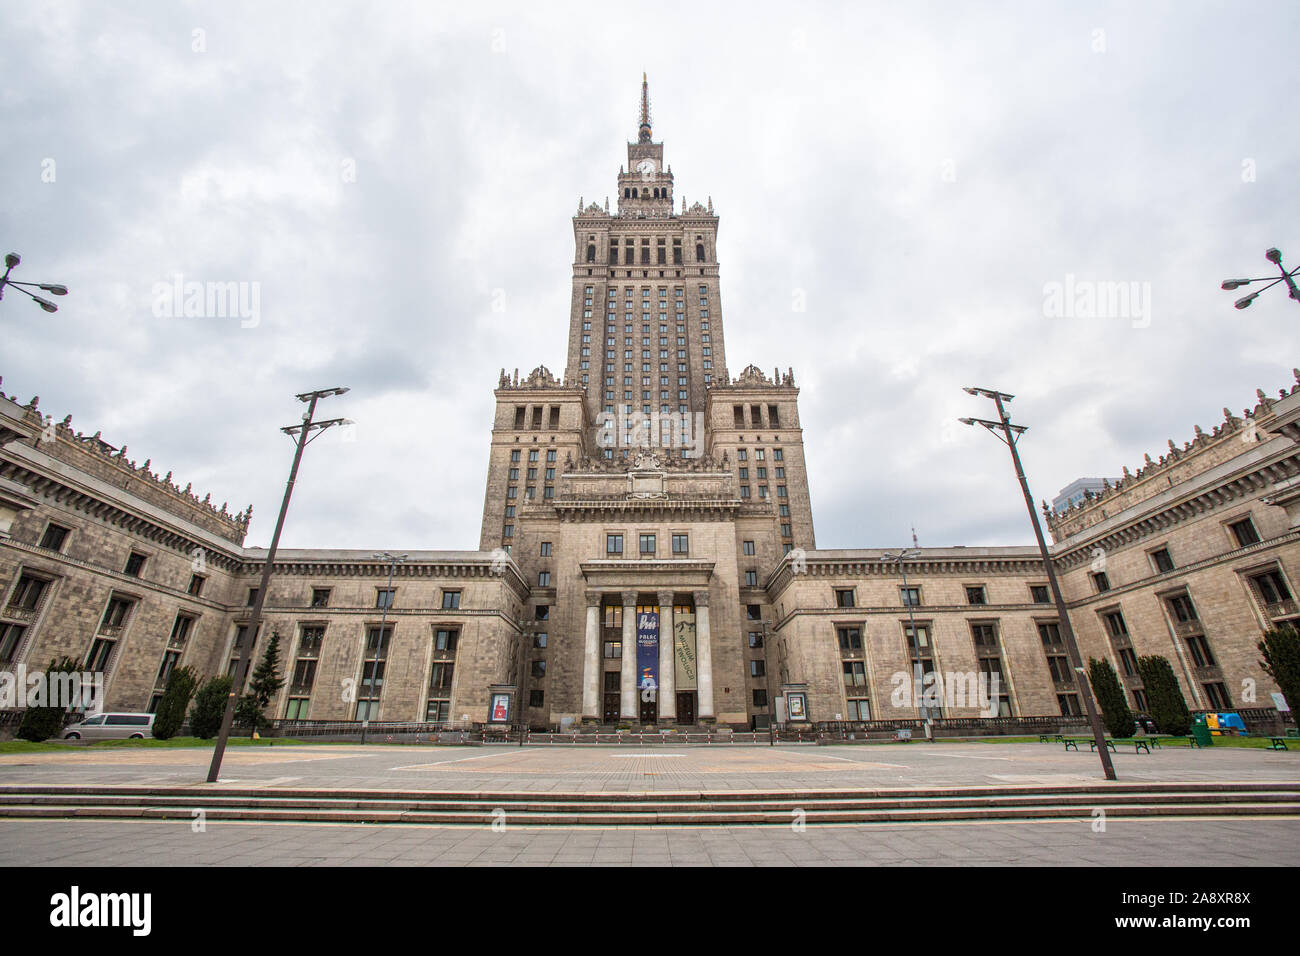 Palace of Culture and Science (Pałac Kultury i Nauki) in Warsaw, Poland. Stock Photo